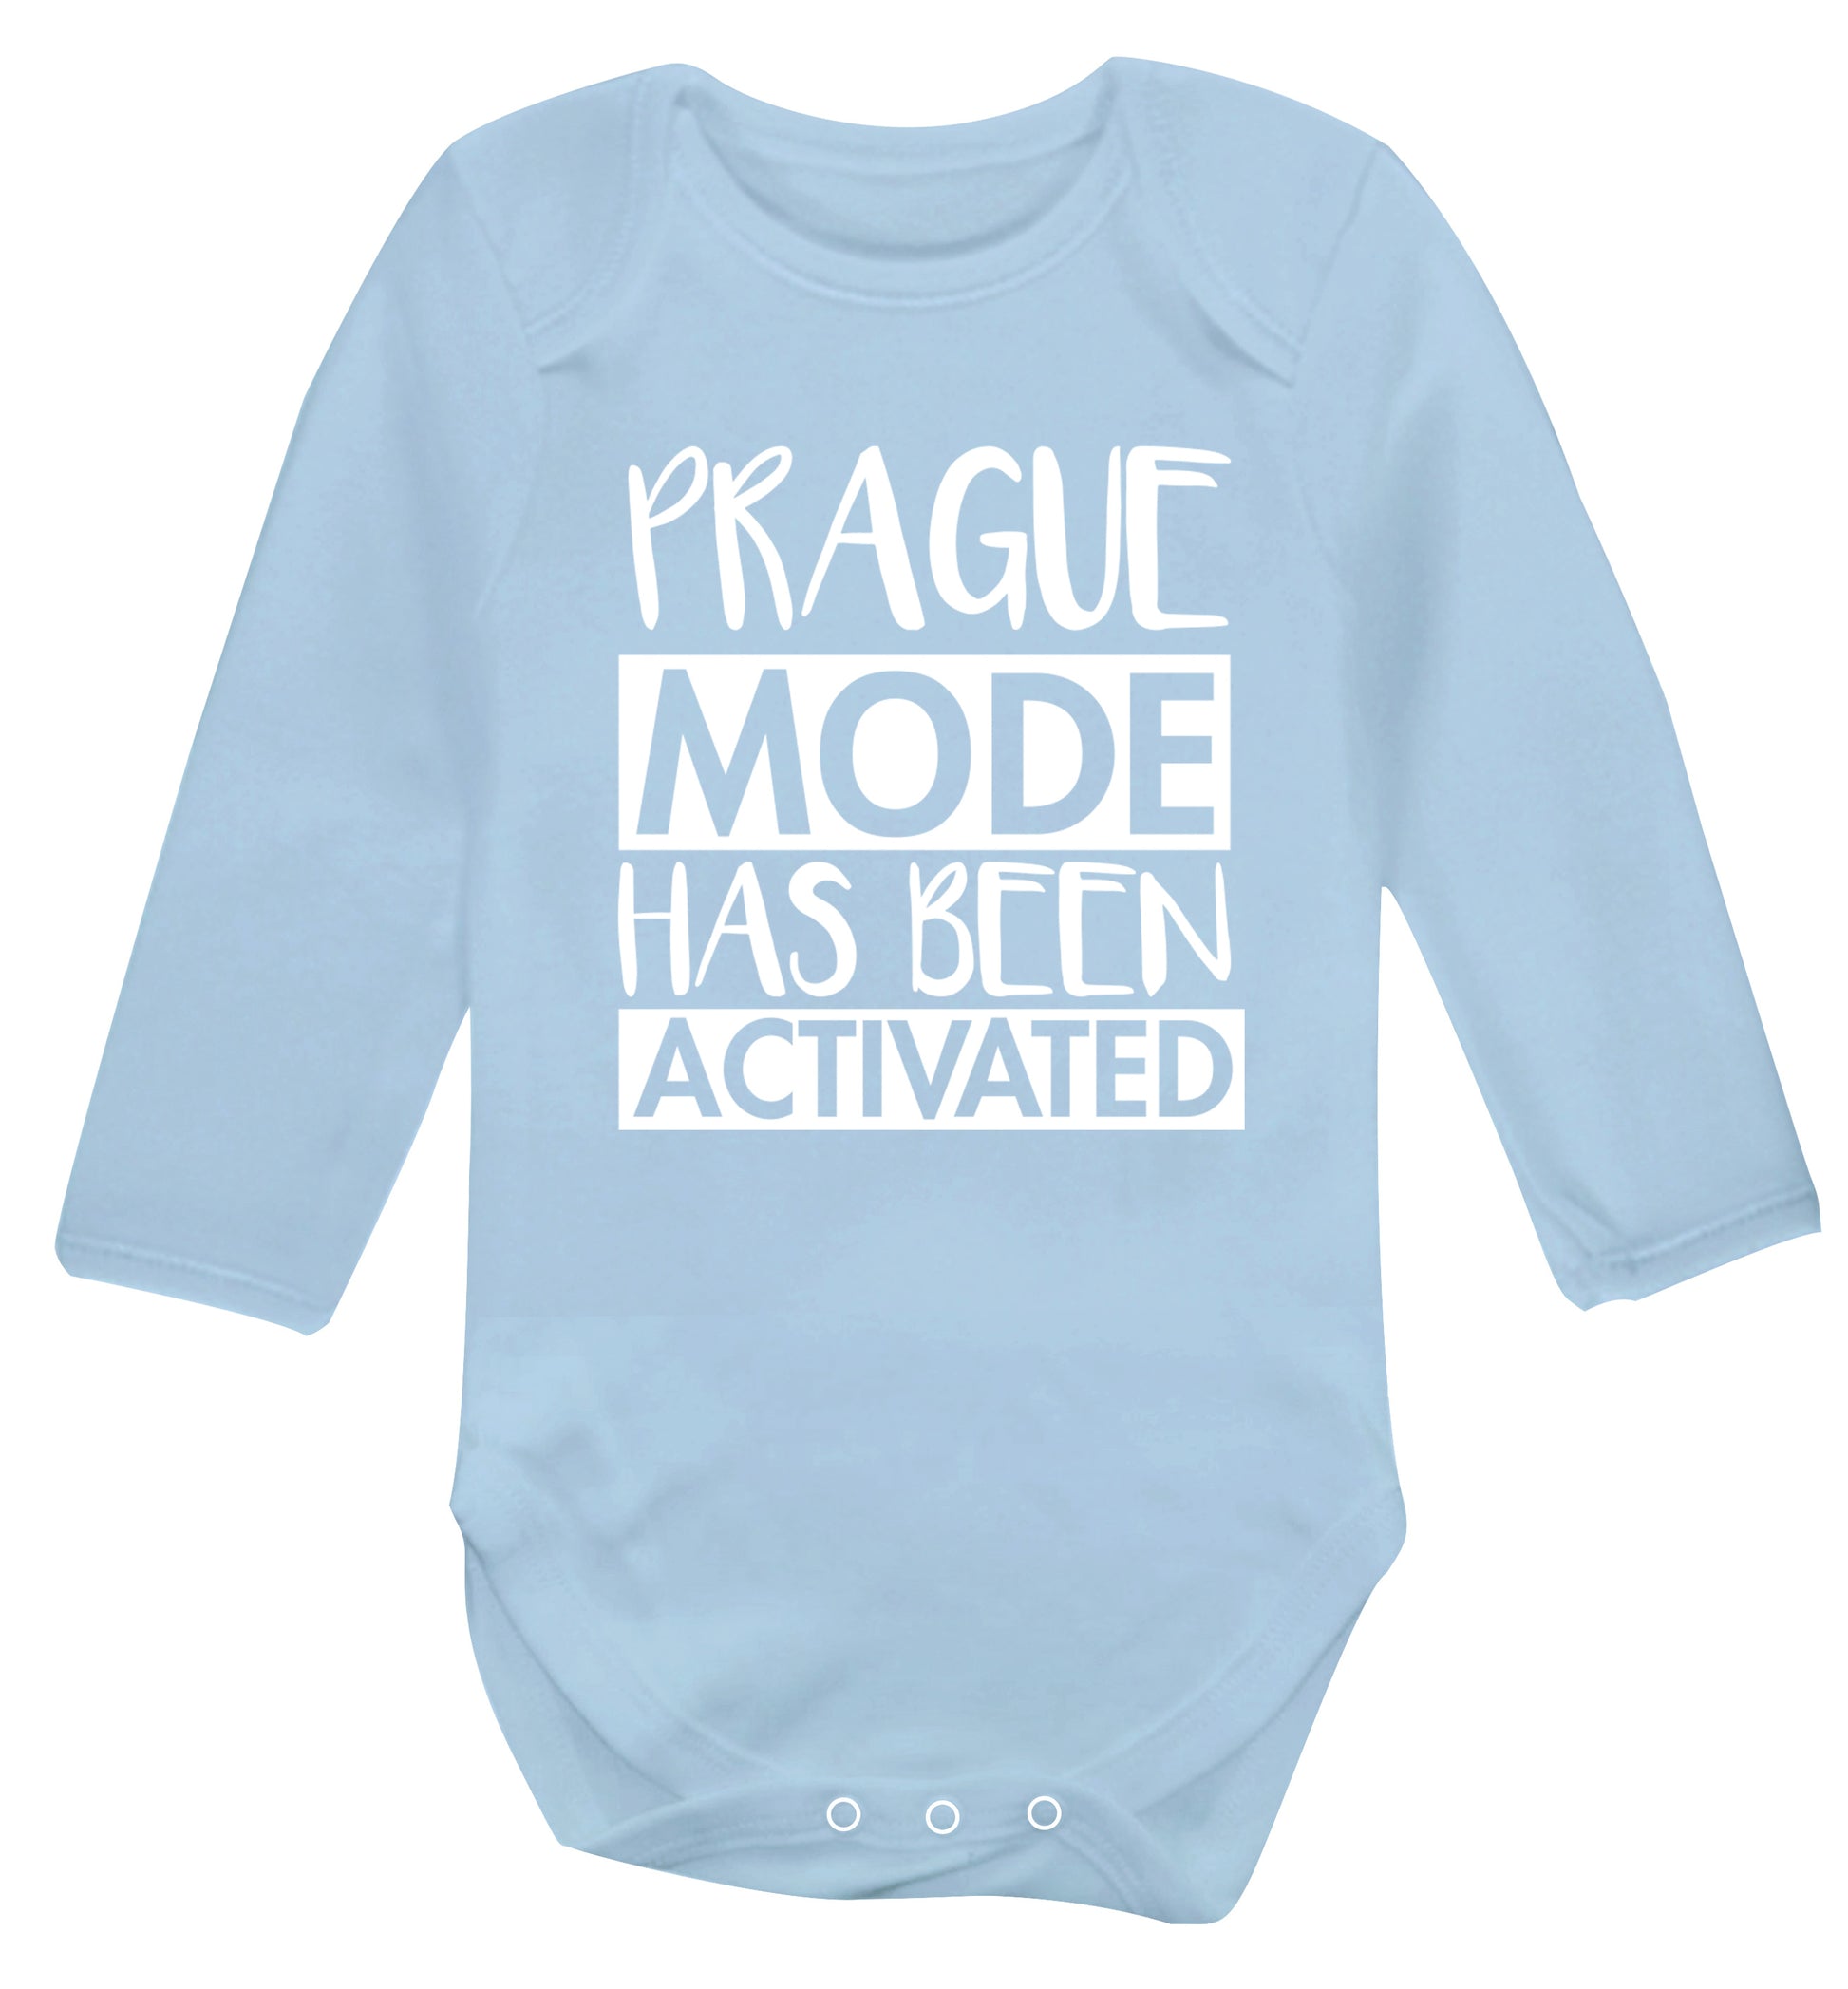 Prague mode has been activated Baby Vest long sleeved pale blue 6-12 months